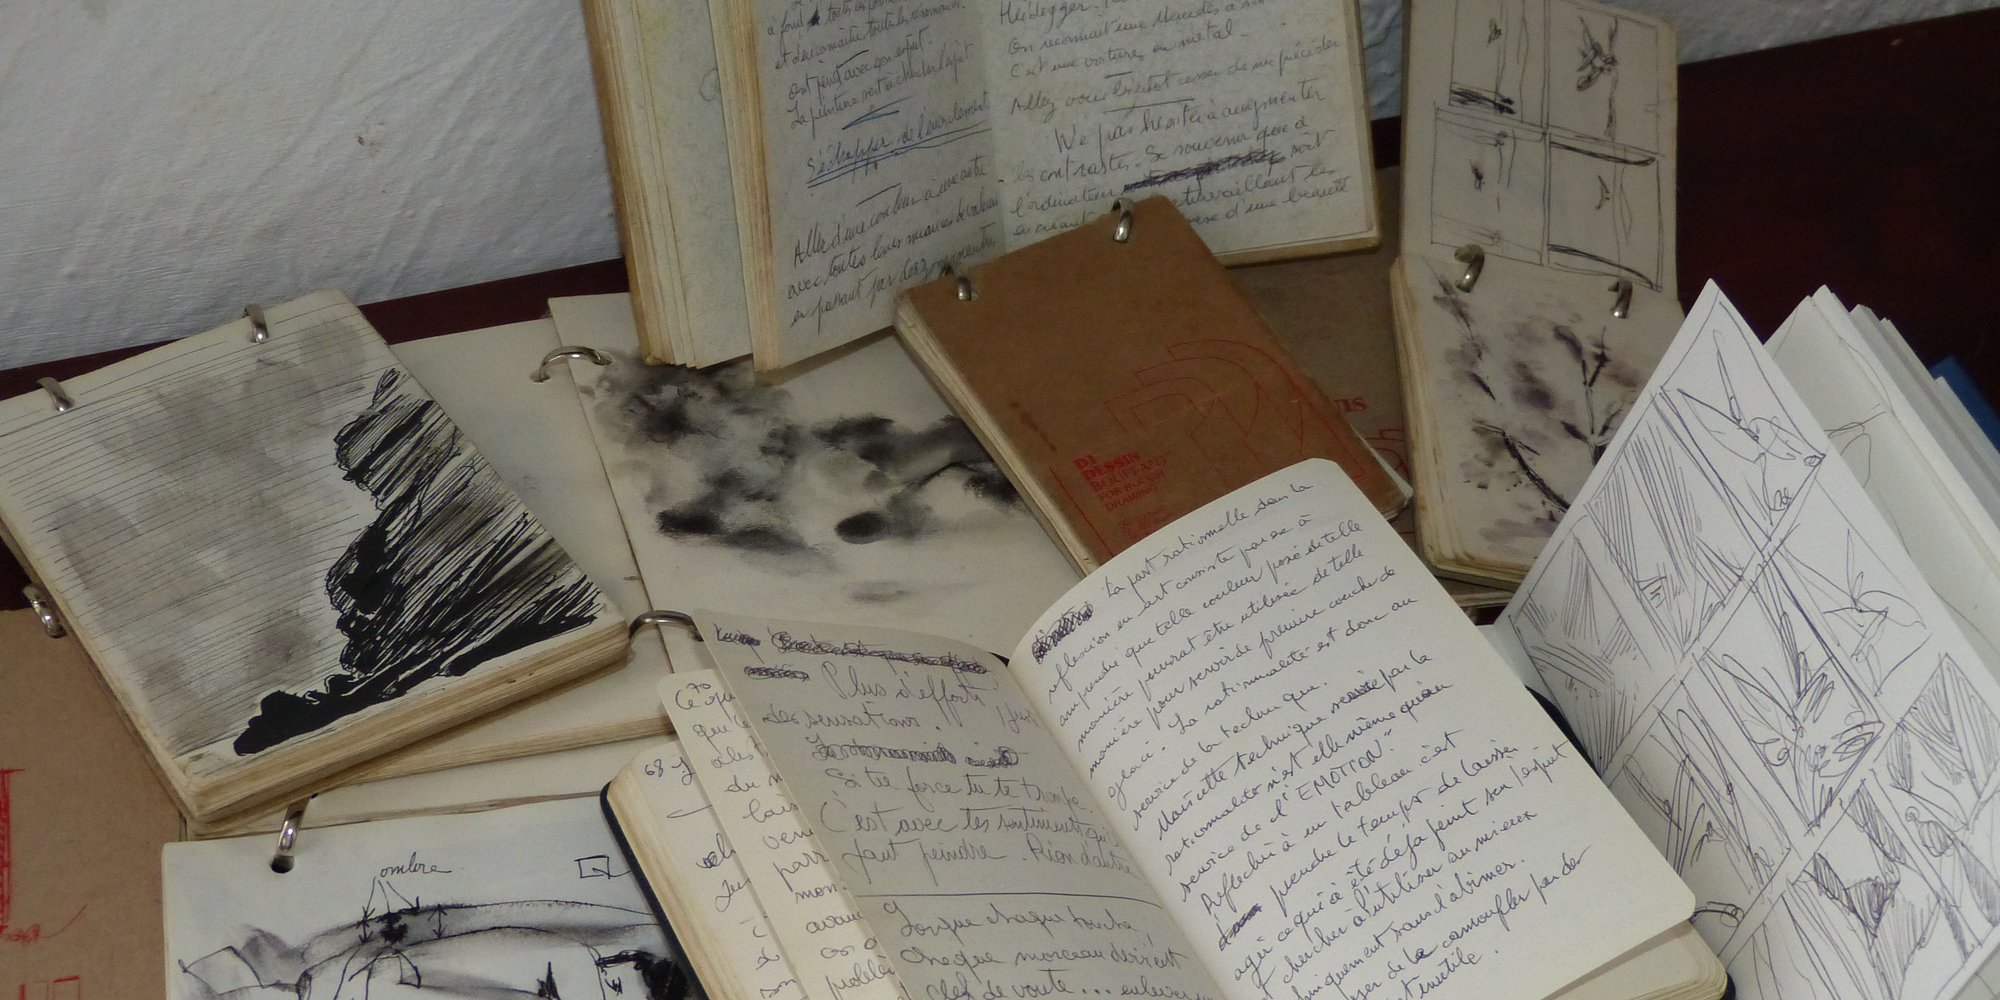 Artist musings: Scattered thoughts from an artist's notebook